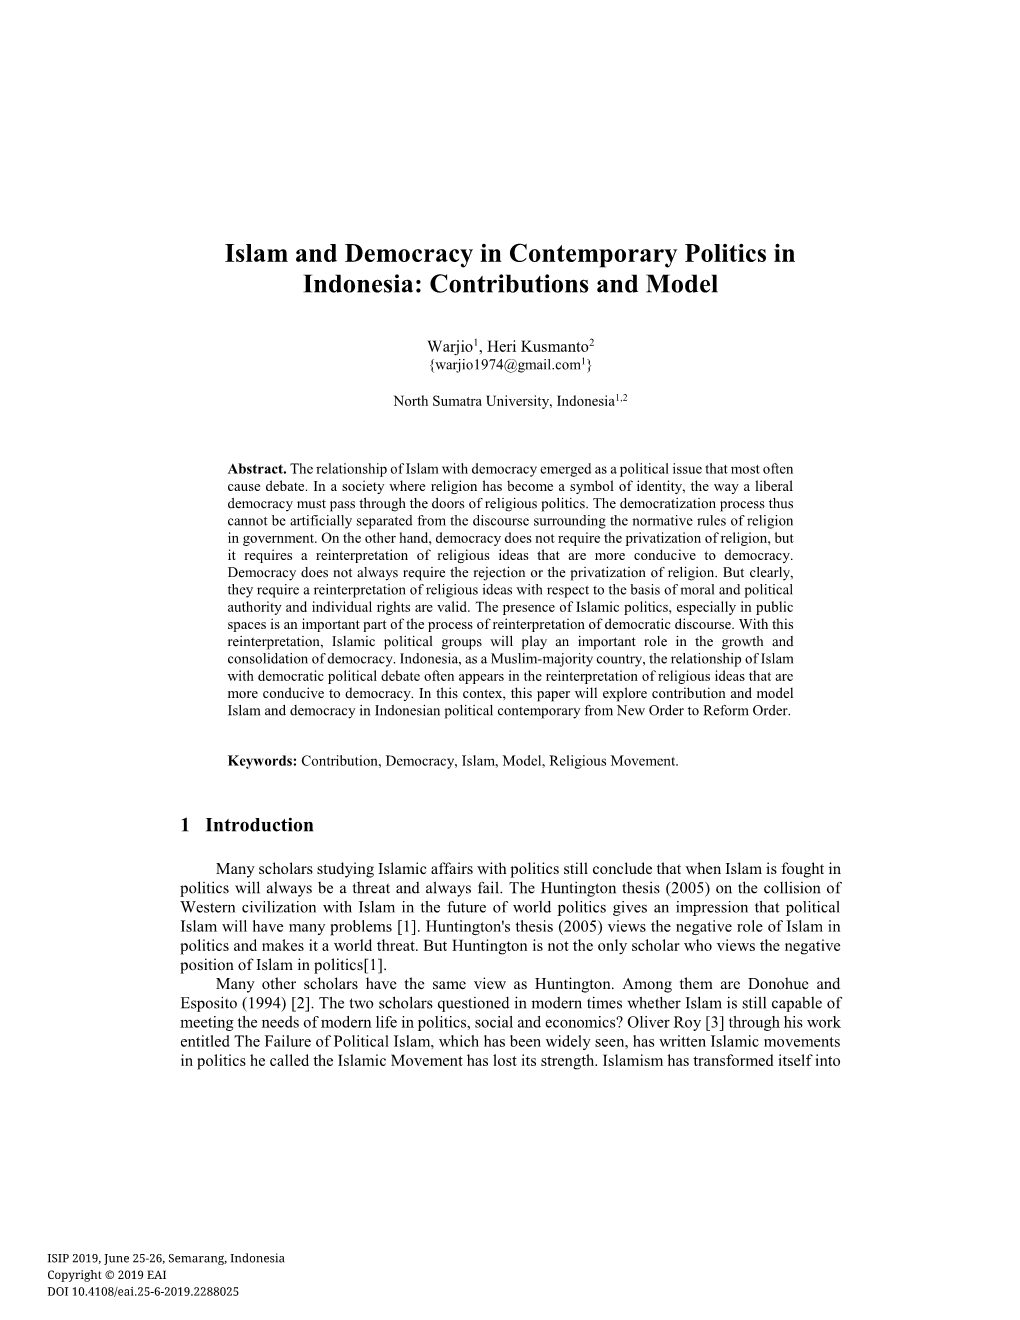 Islam and Democracy in Contemporary Politics in Indonesia: Contributions and Model